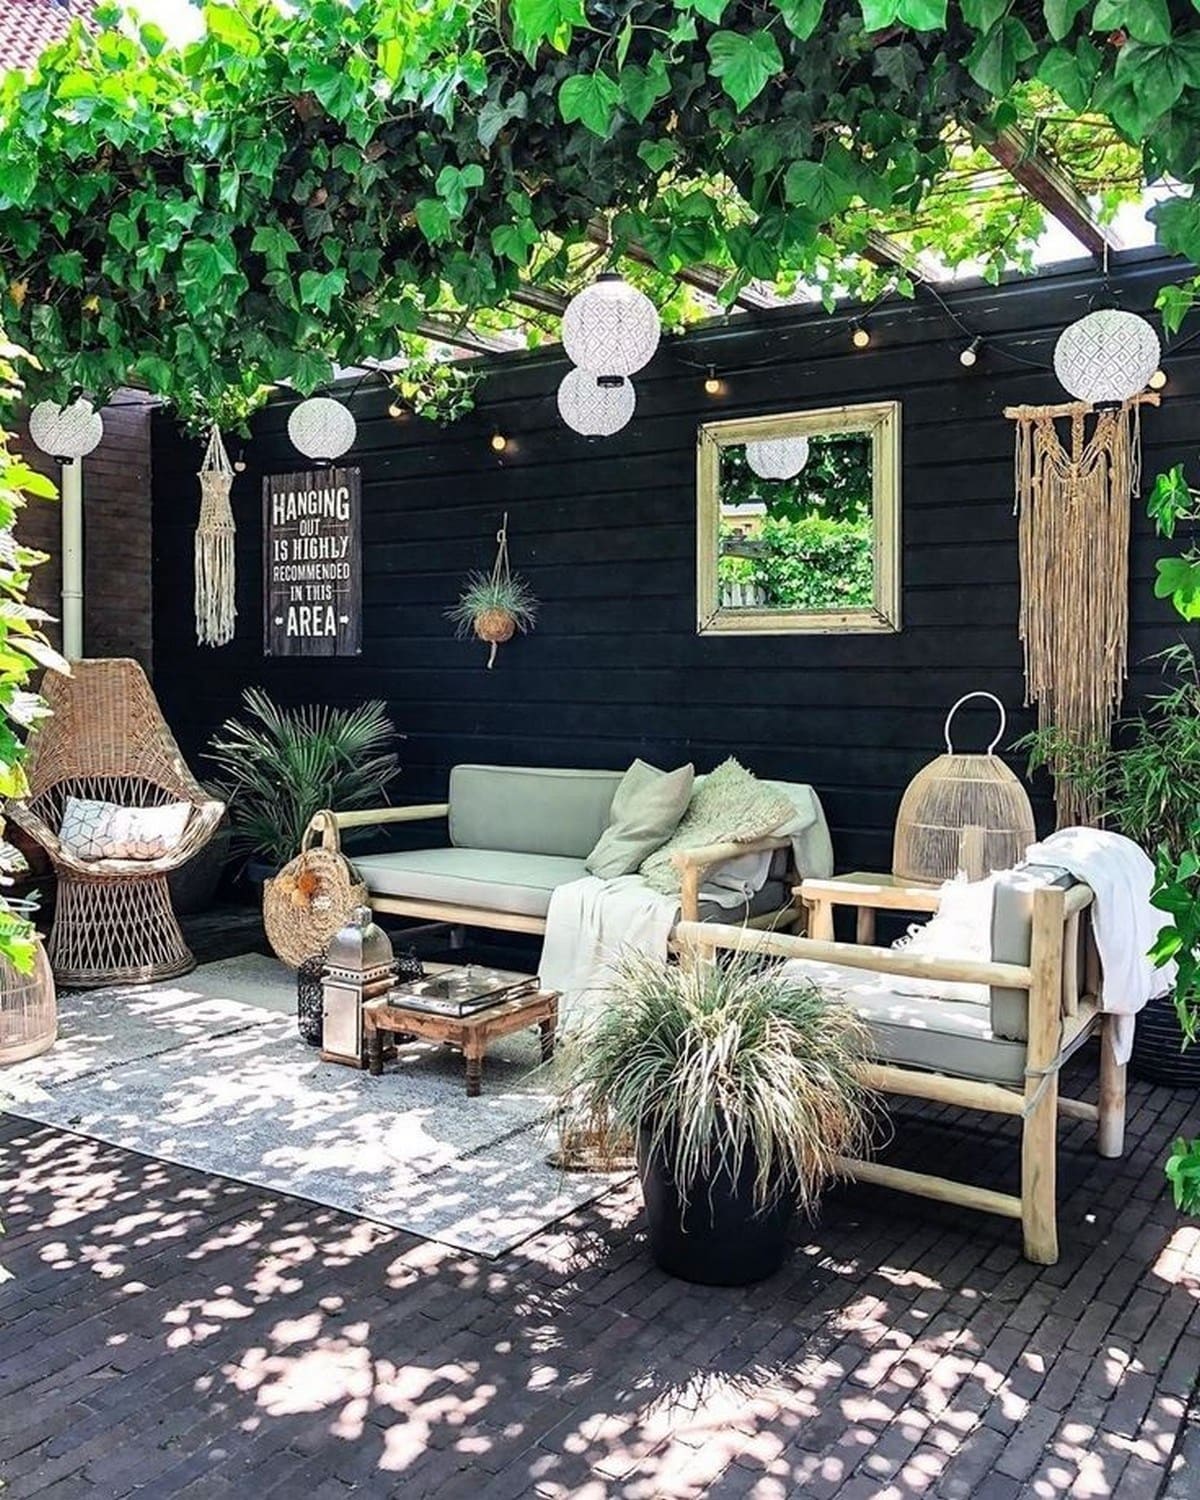 25 fabulous ideas to turn patios into inviting outdoor spaces - 73